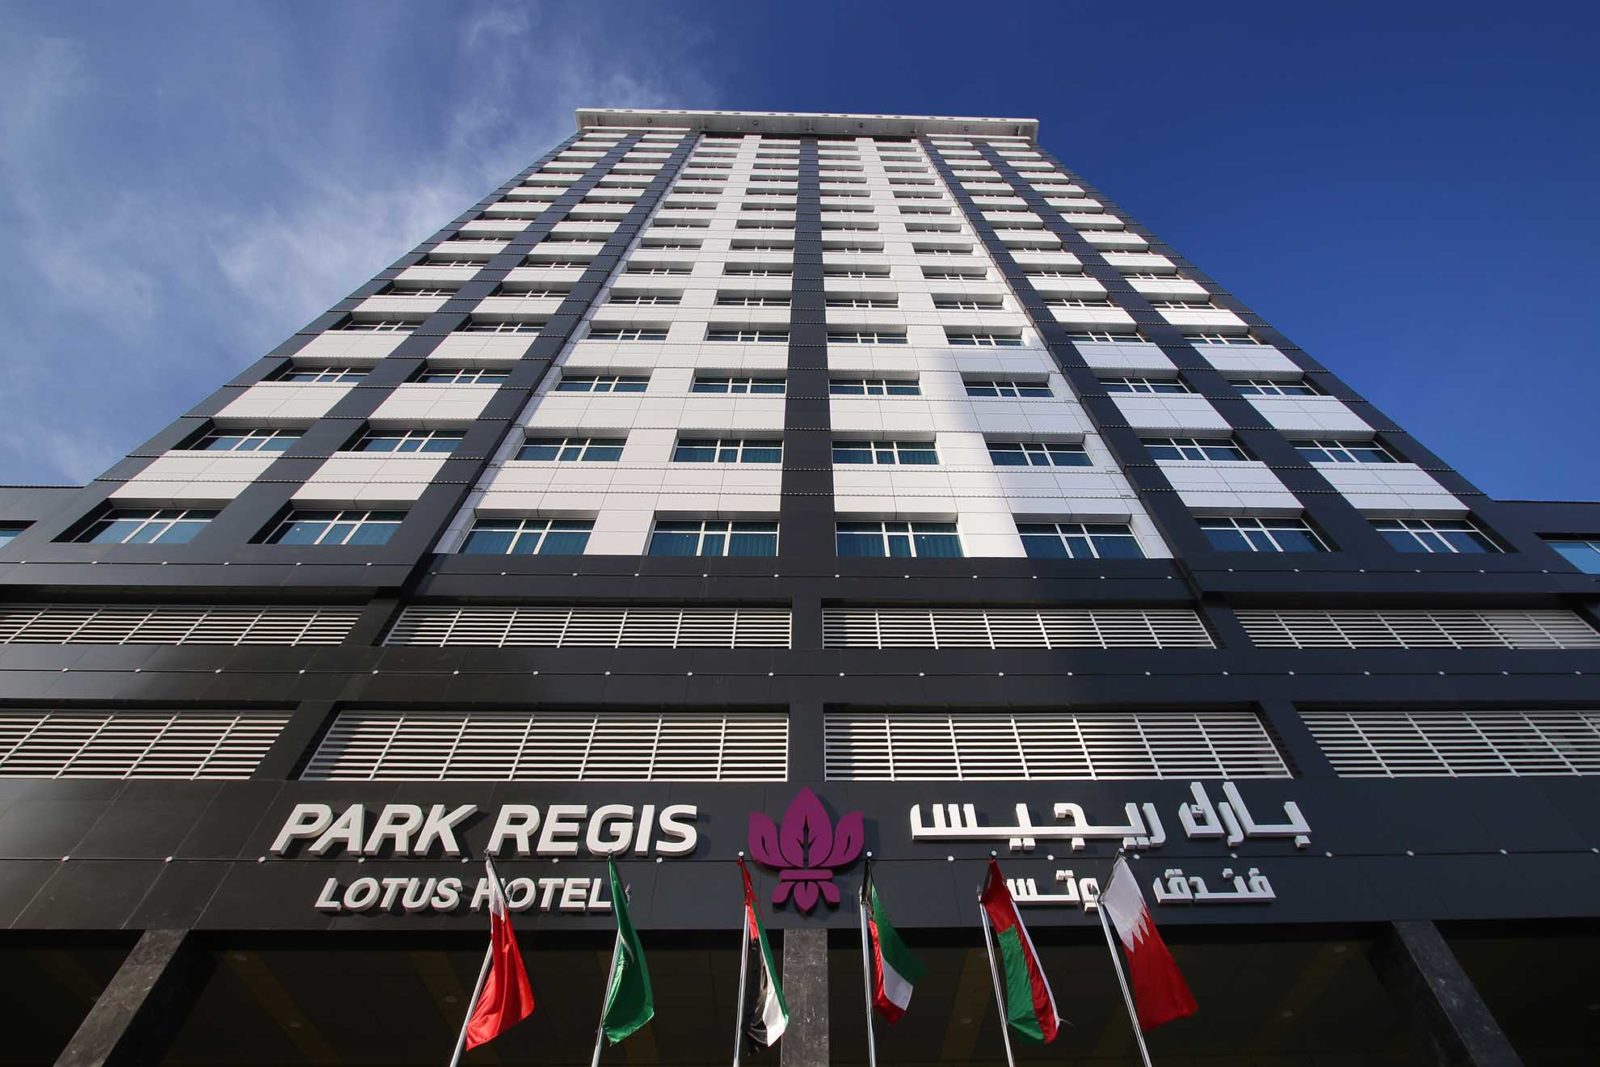 Park Regis Lotus Hotel, StayWell's First Property in Bahrain